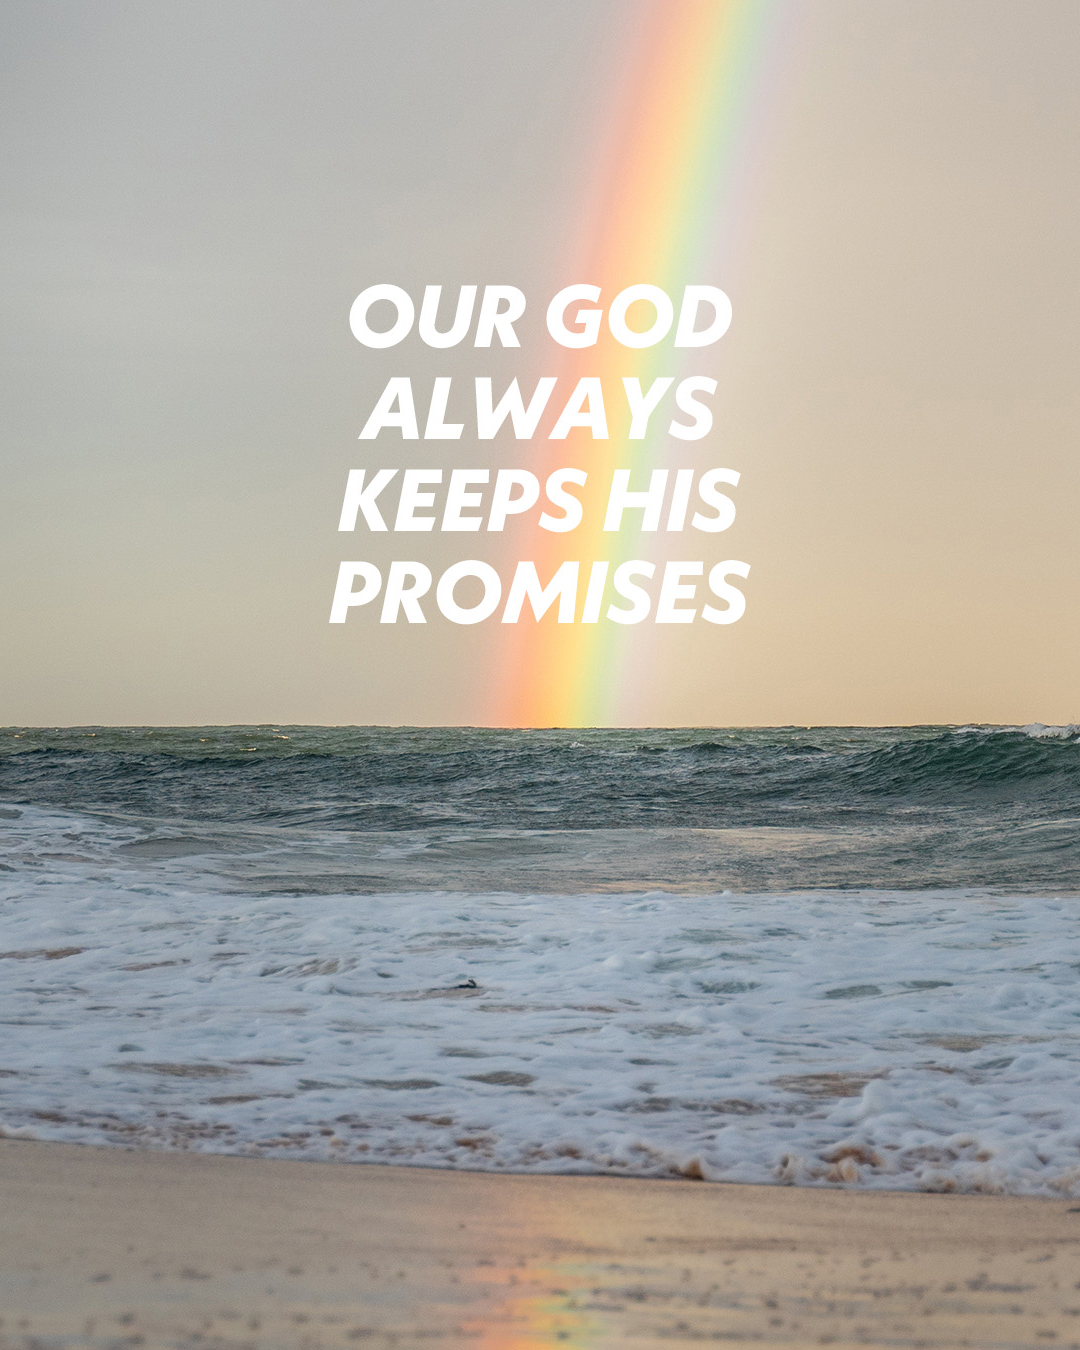 Our God always keeps His promises